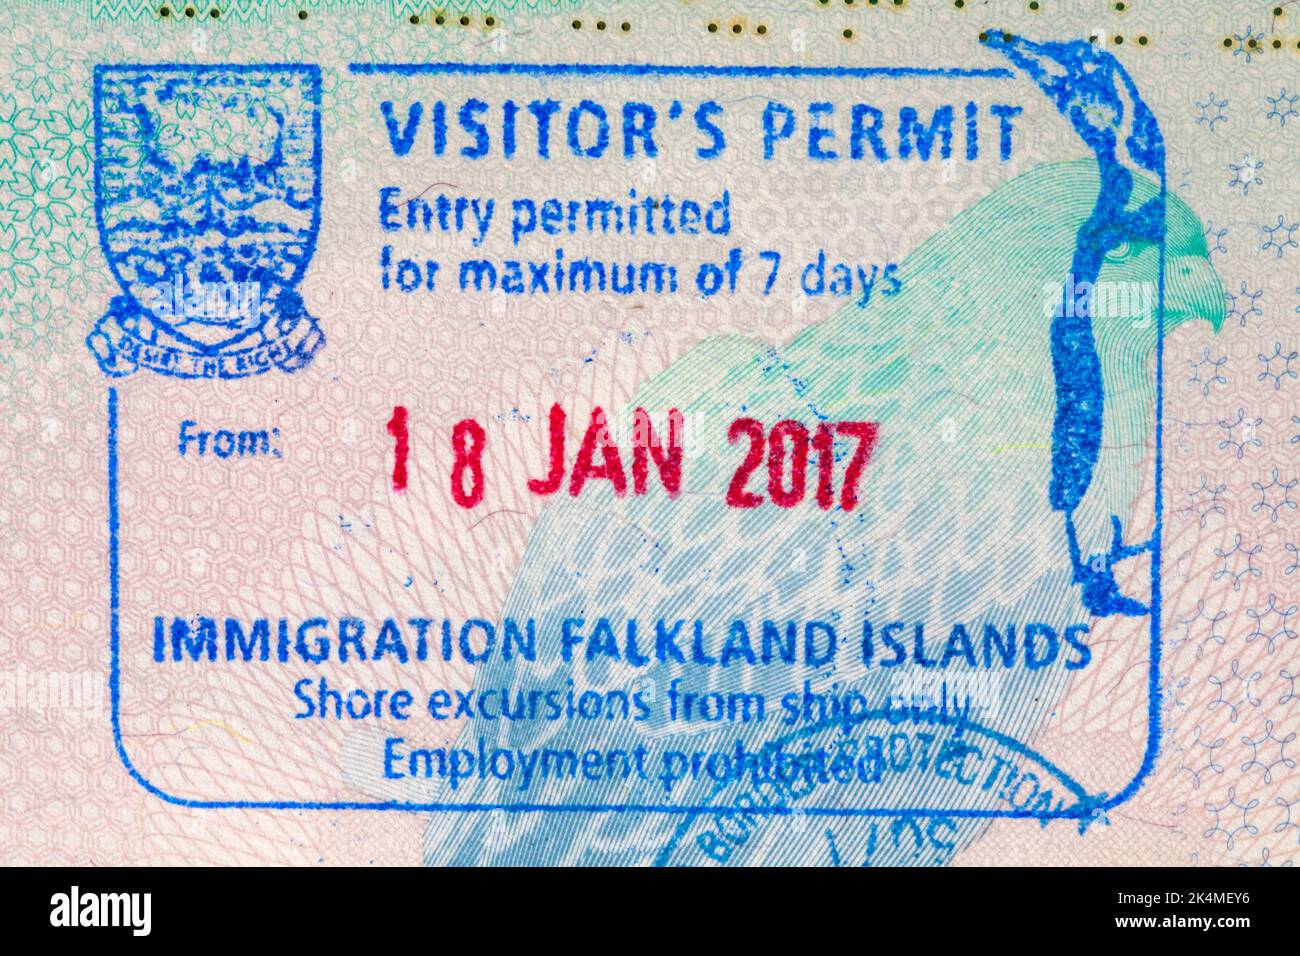 Visitors Permit Immigration Falkland Islands entry permitted for maximum of 7 days 18 Jan 2017 stamp in British passport Stock Photo